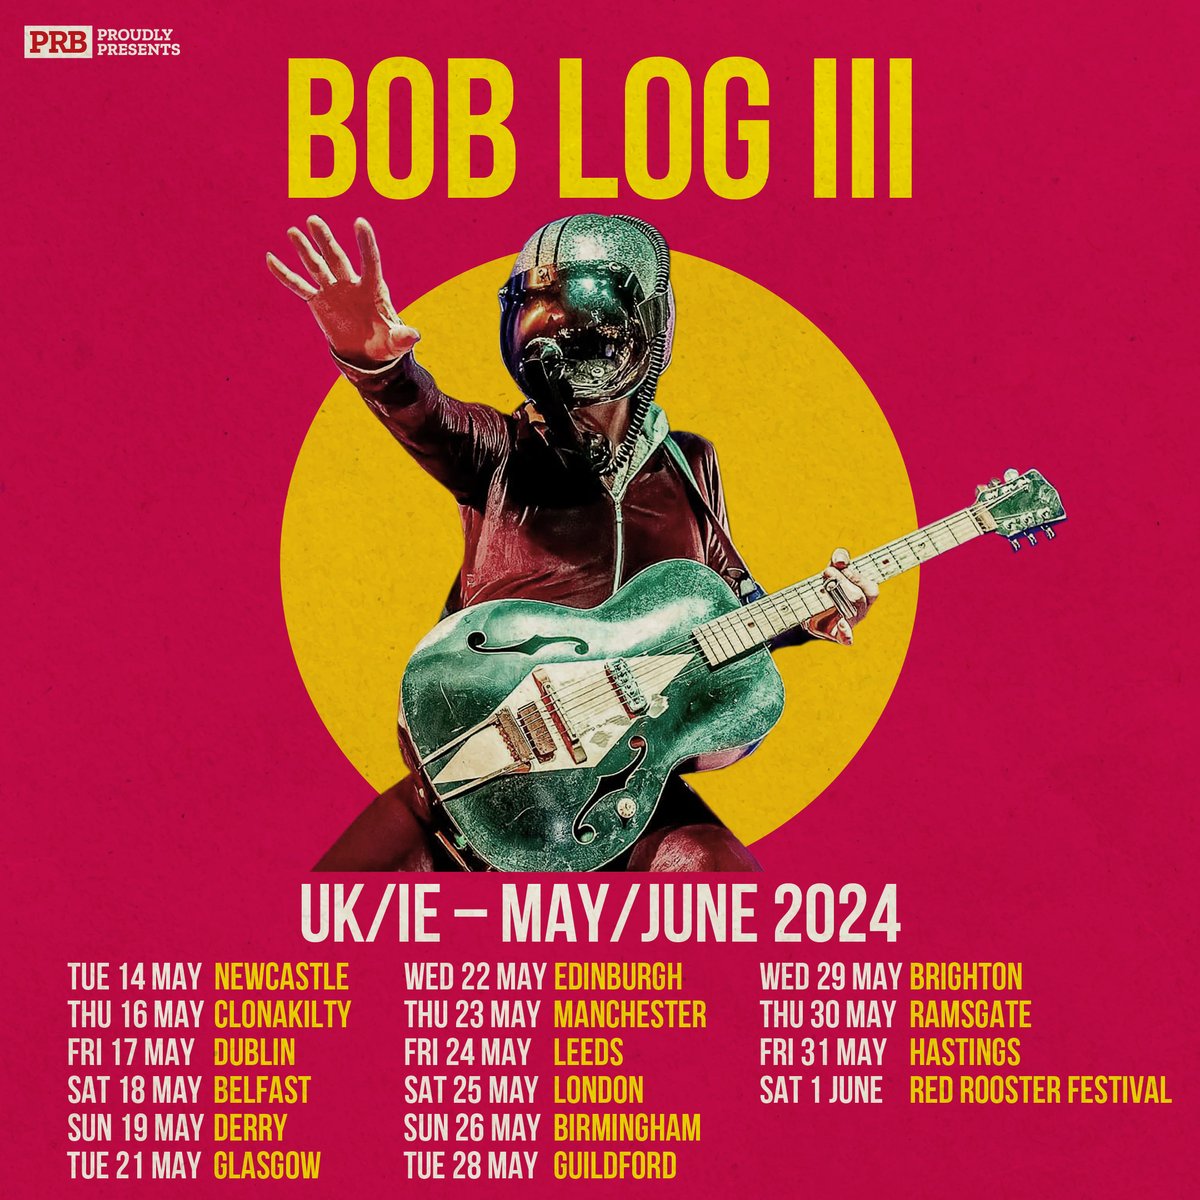 Experience an incredible show with @boblogiii this May in The Sugar Club! Bob Log III is an American slide guitar one-man band. This is a show that needs to be experienced live! Friday 17.05 Tickets: bit.ly/TSC_BobLogIII